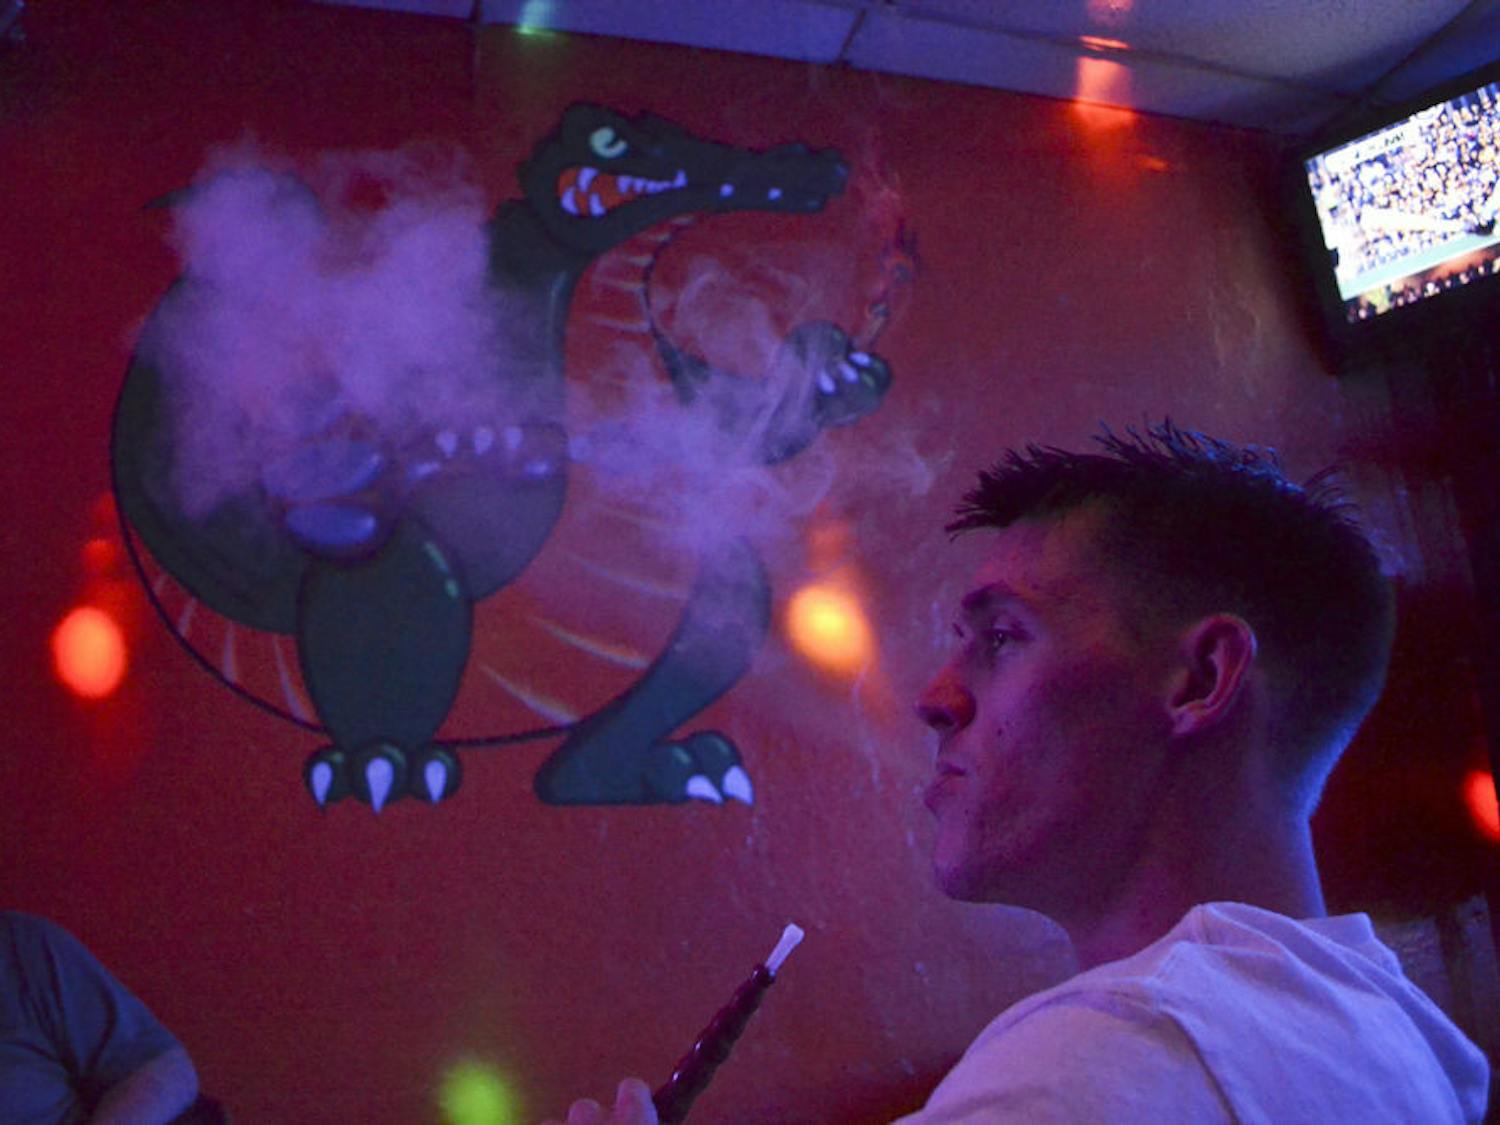 Taylor Ratcliff, a 23-year-old who will return to UF as a history senior in the spring, blows out Gator Mist flavored smoke at Sheesha on Oct. 7, 2015. Ratcliff said he used smoke at Sheesha twice a week with friends, but hadn’t been back in a while because he purchased his own hookah.